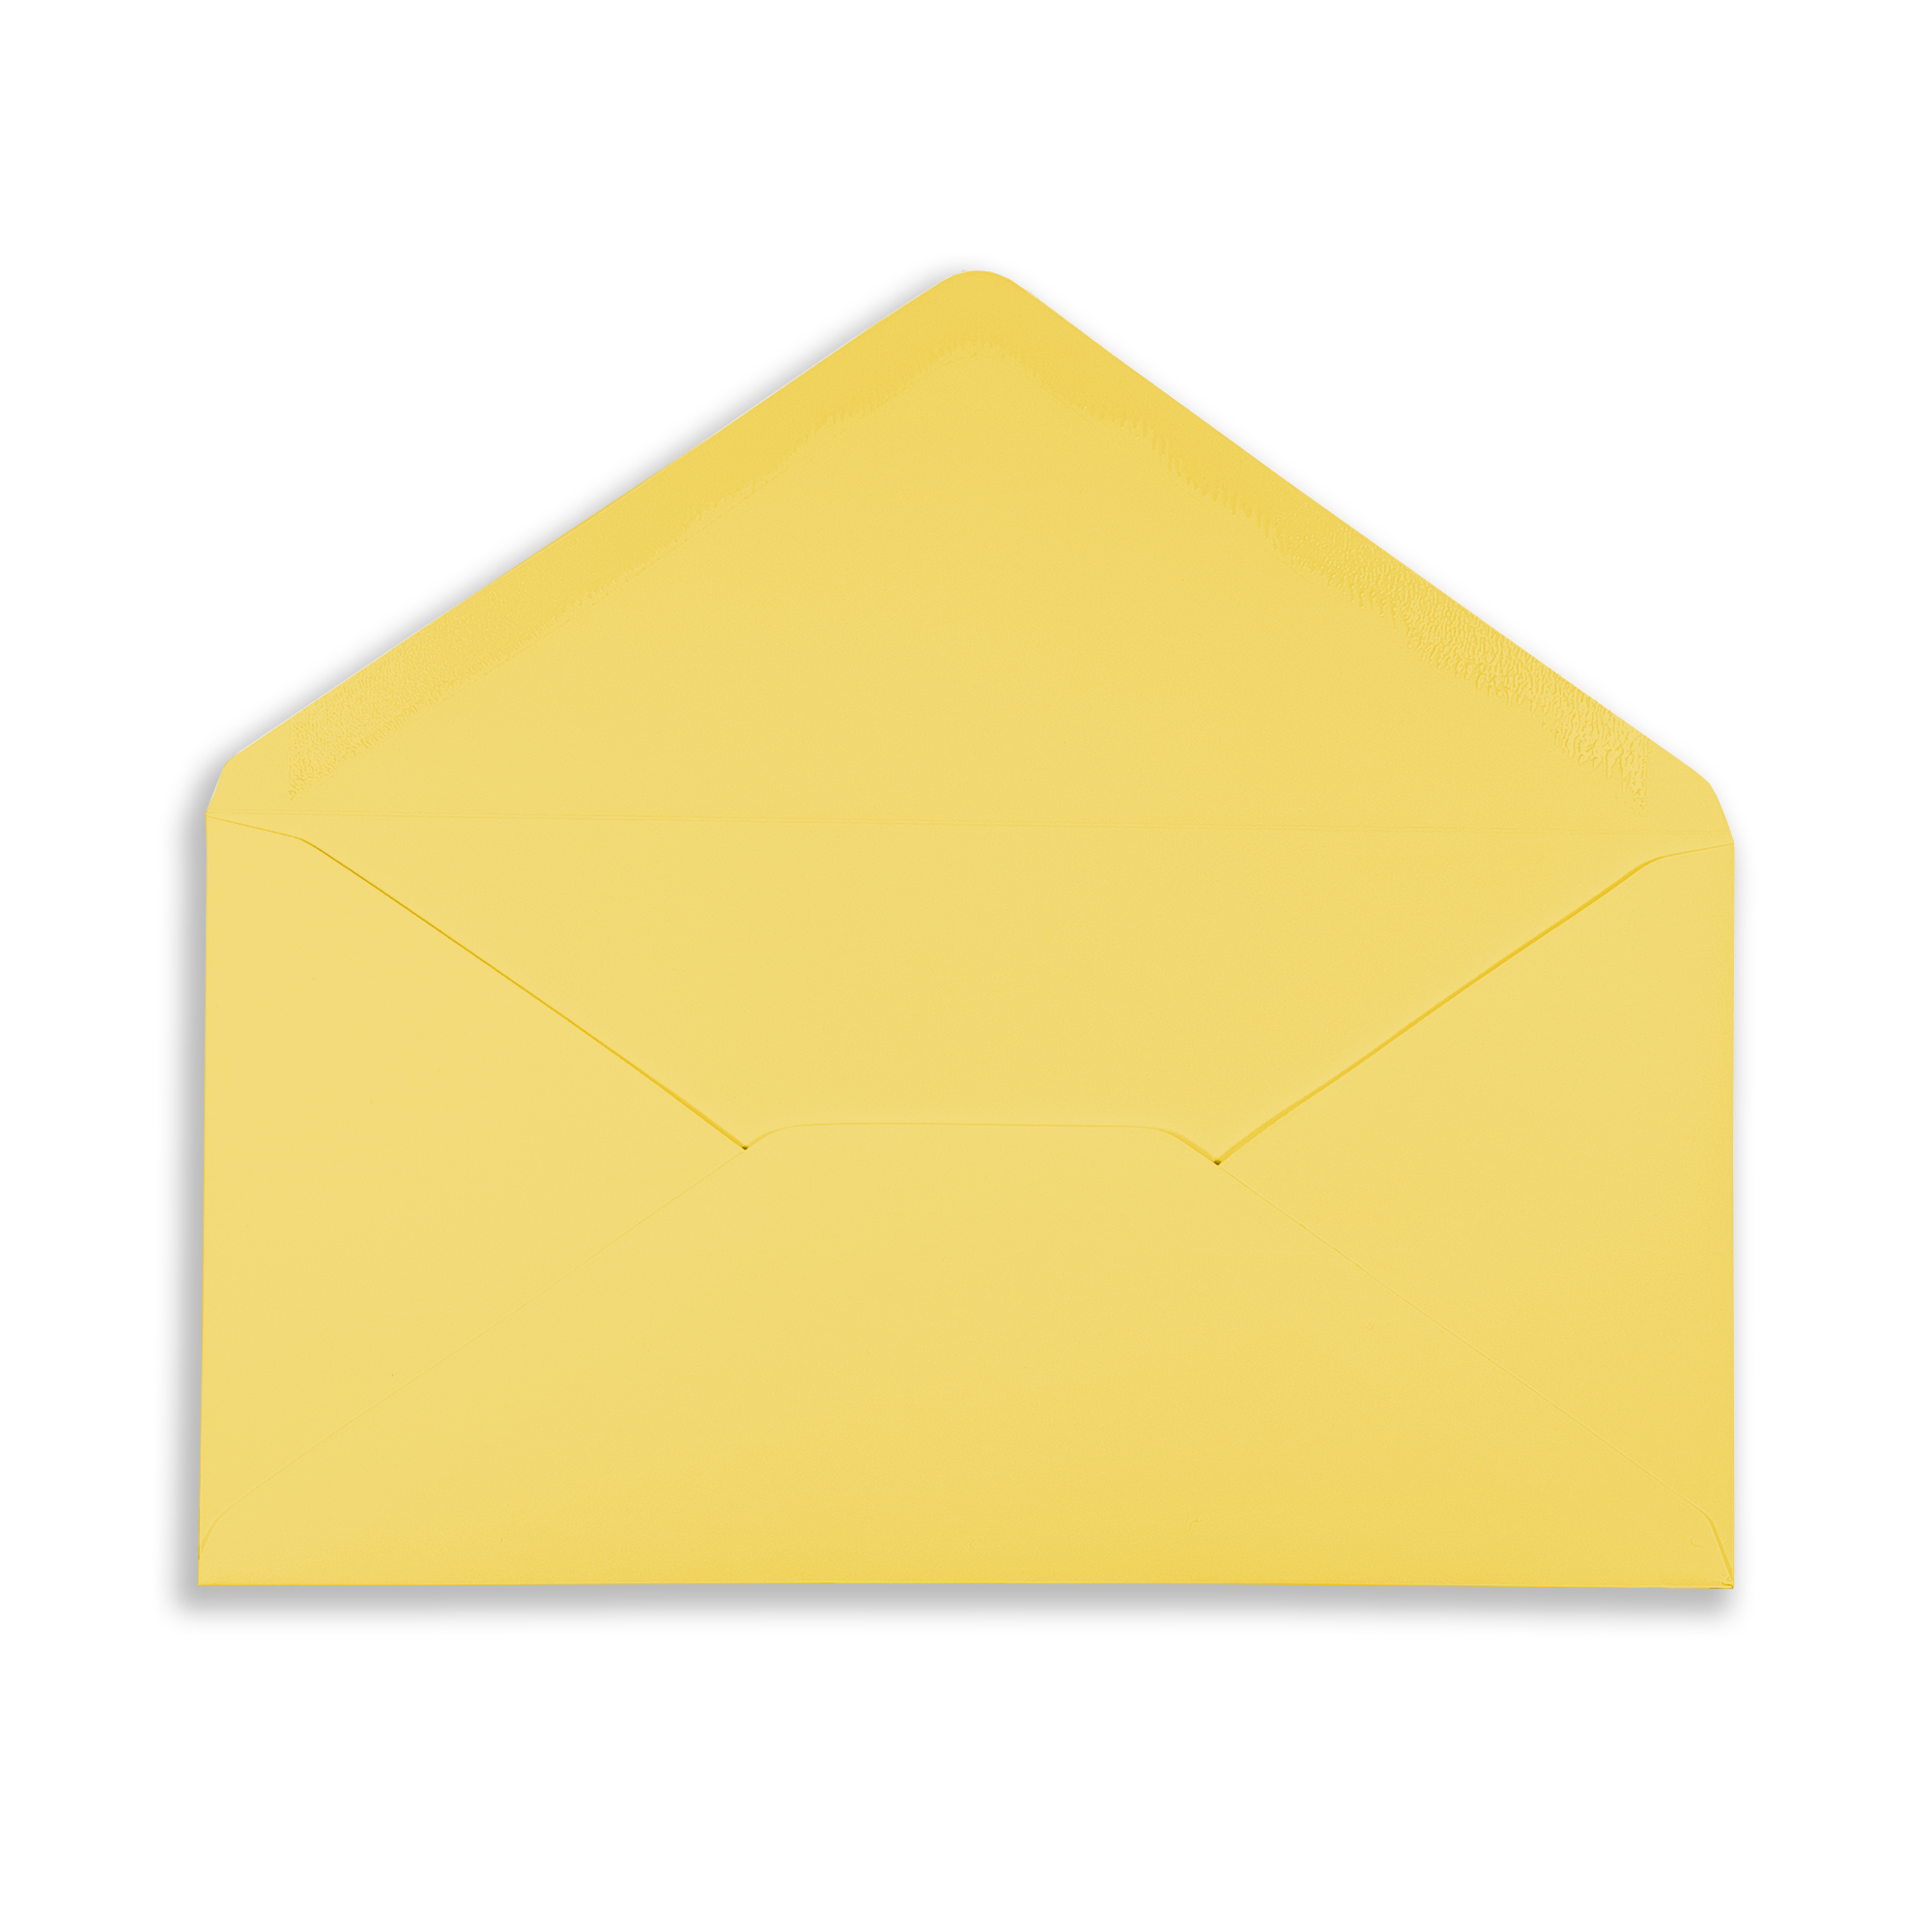 dl-canary-yellow-envelopes-flap-open